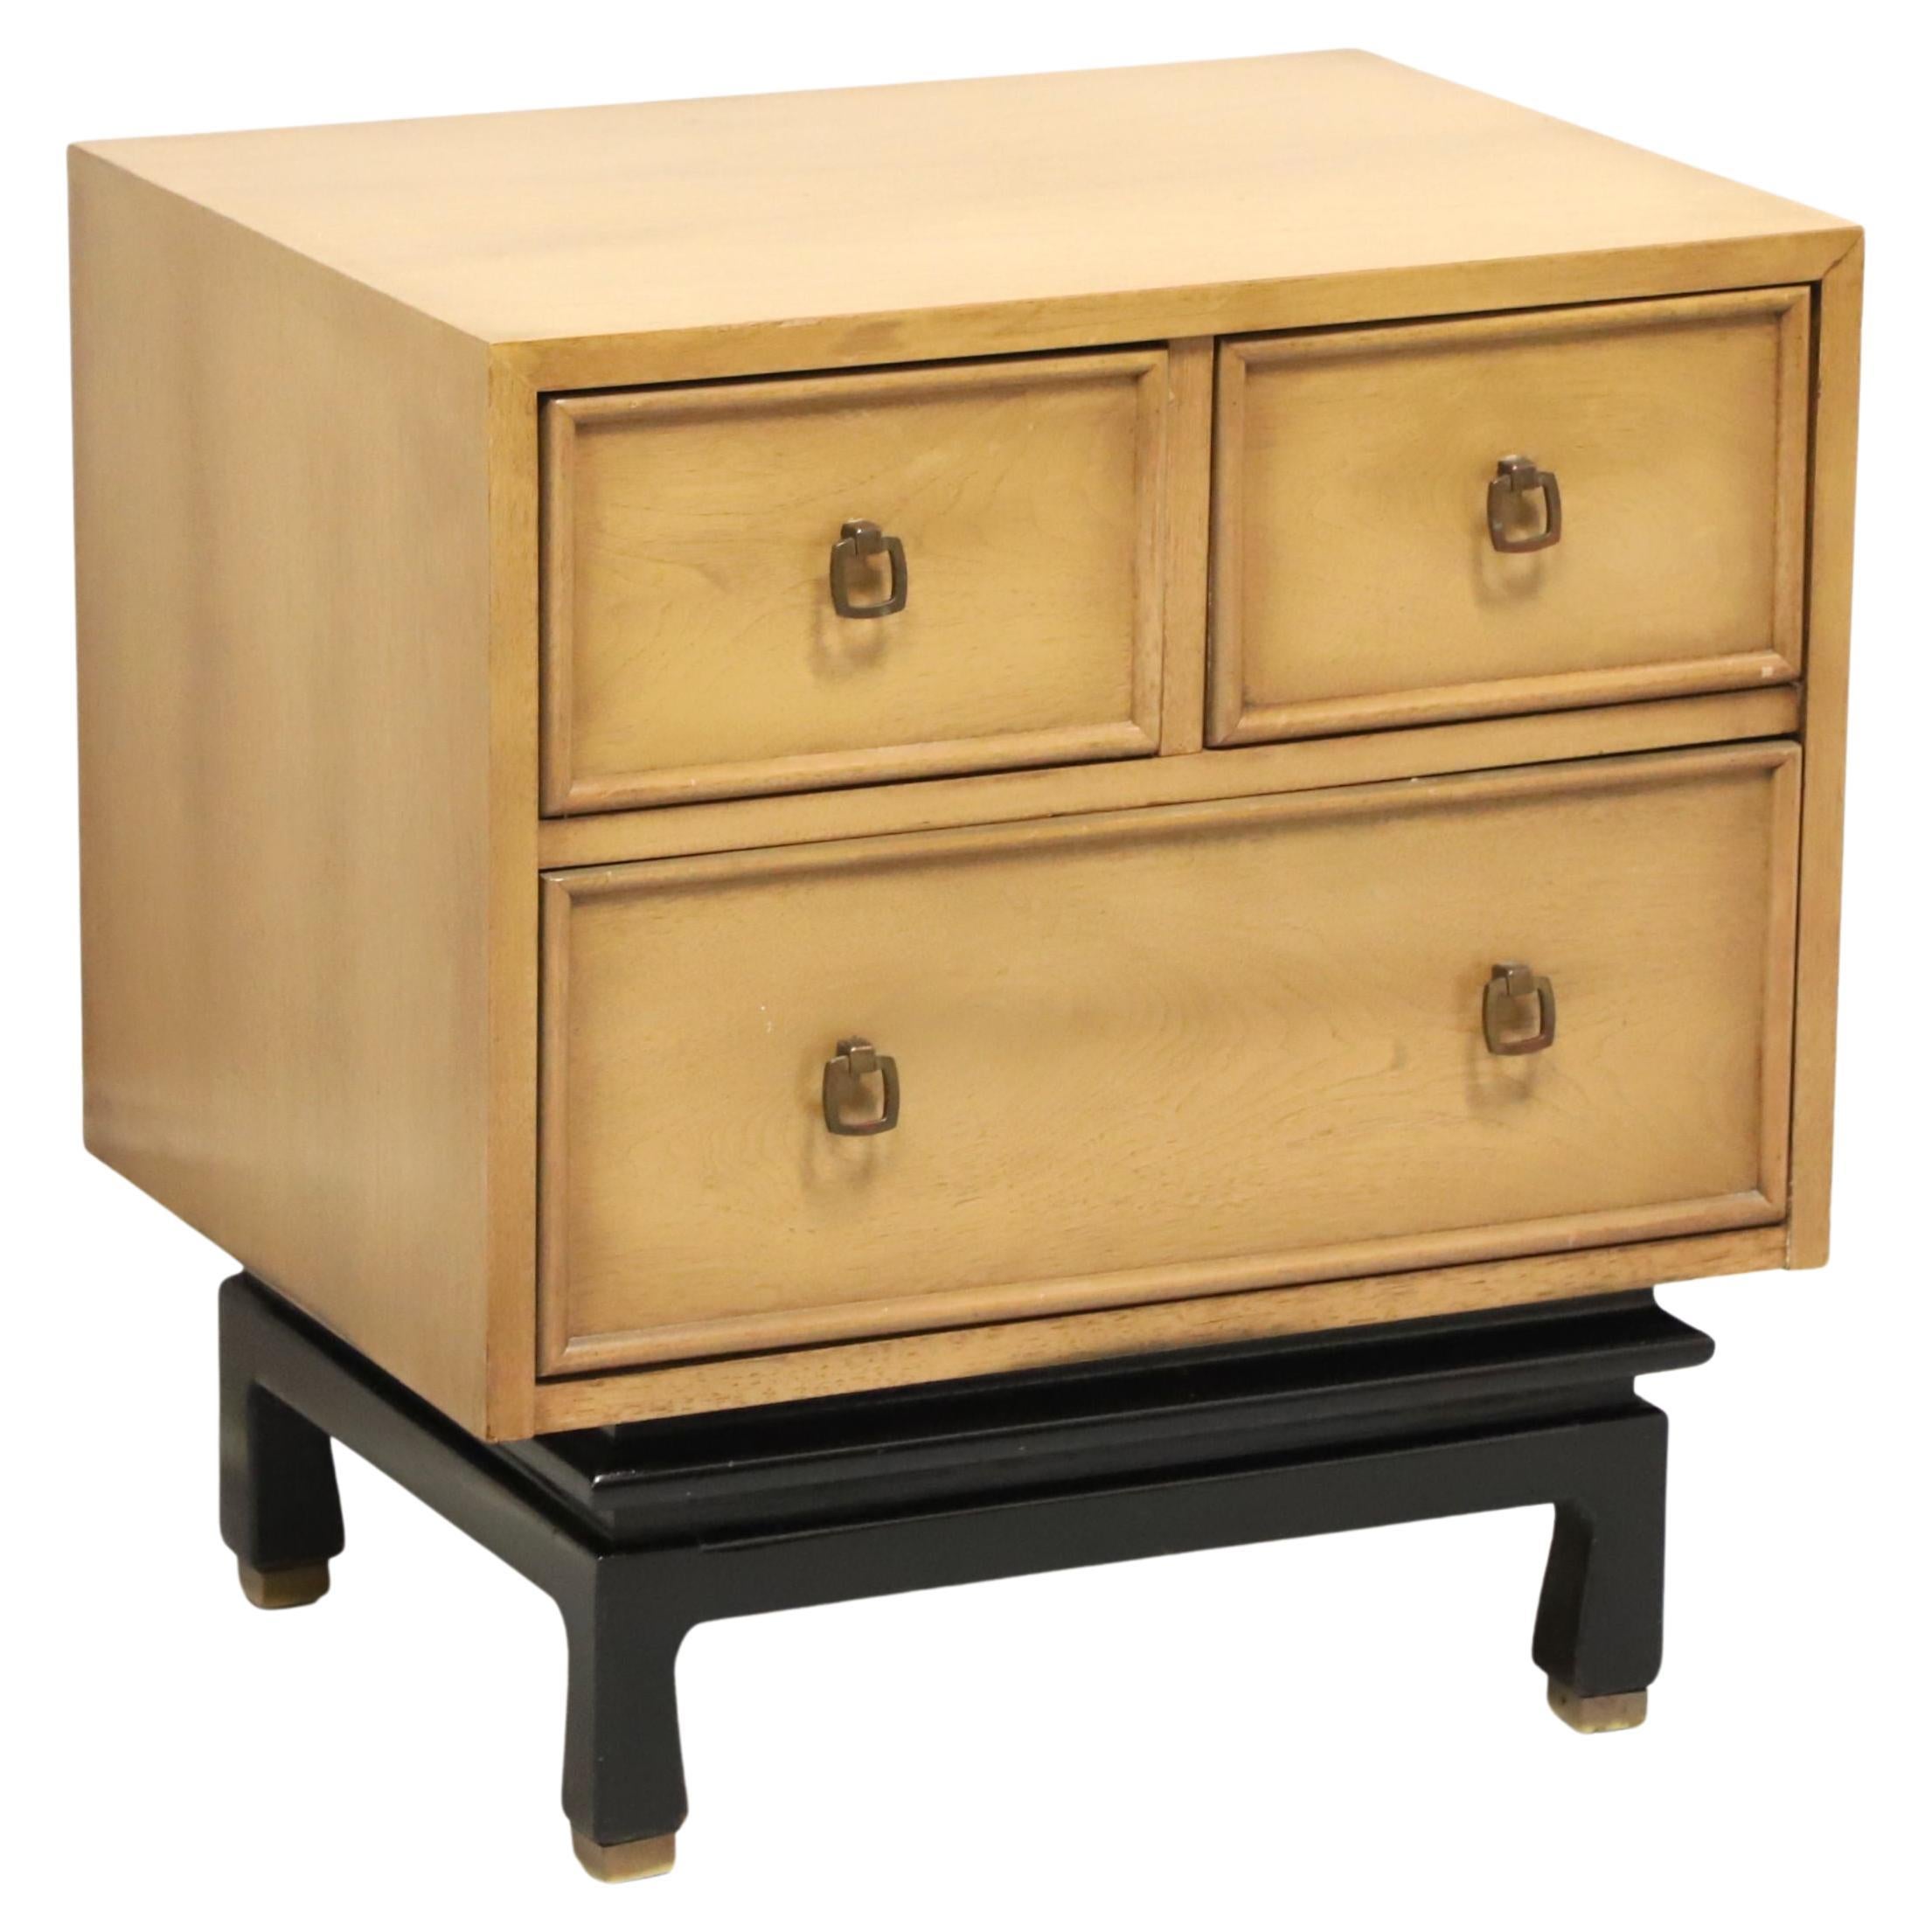 AMERICAN OF MARTINSVILLE Blonde Walnut Asian Inspired Three-Drawer Nightstand For Sale